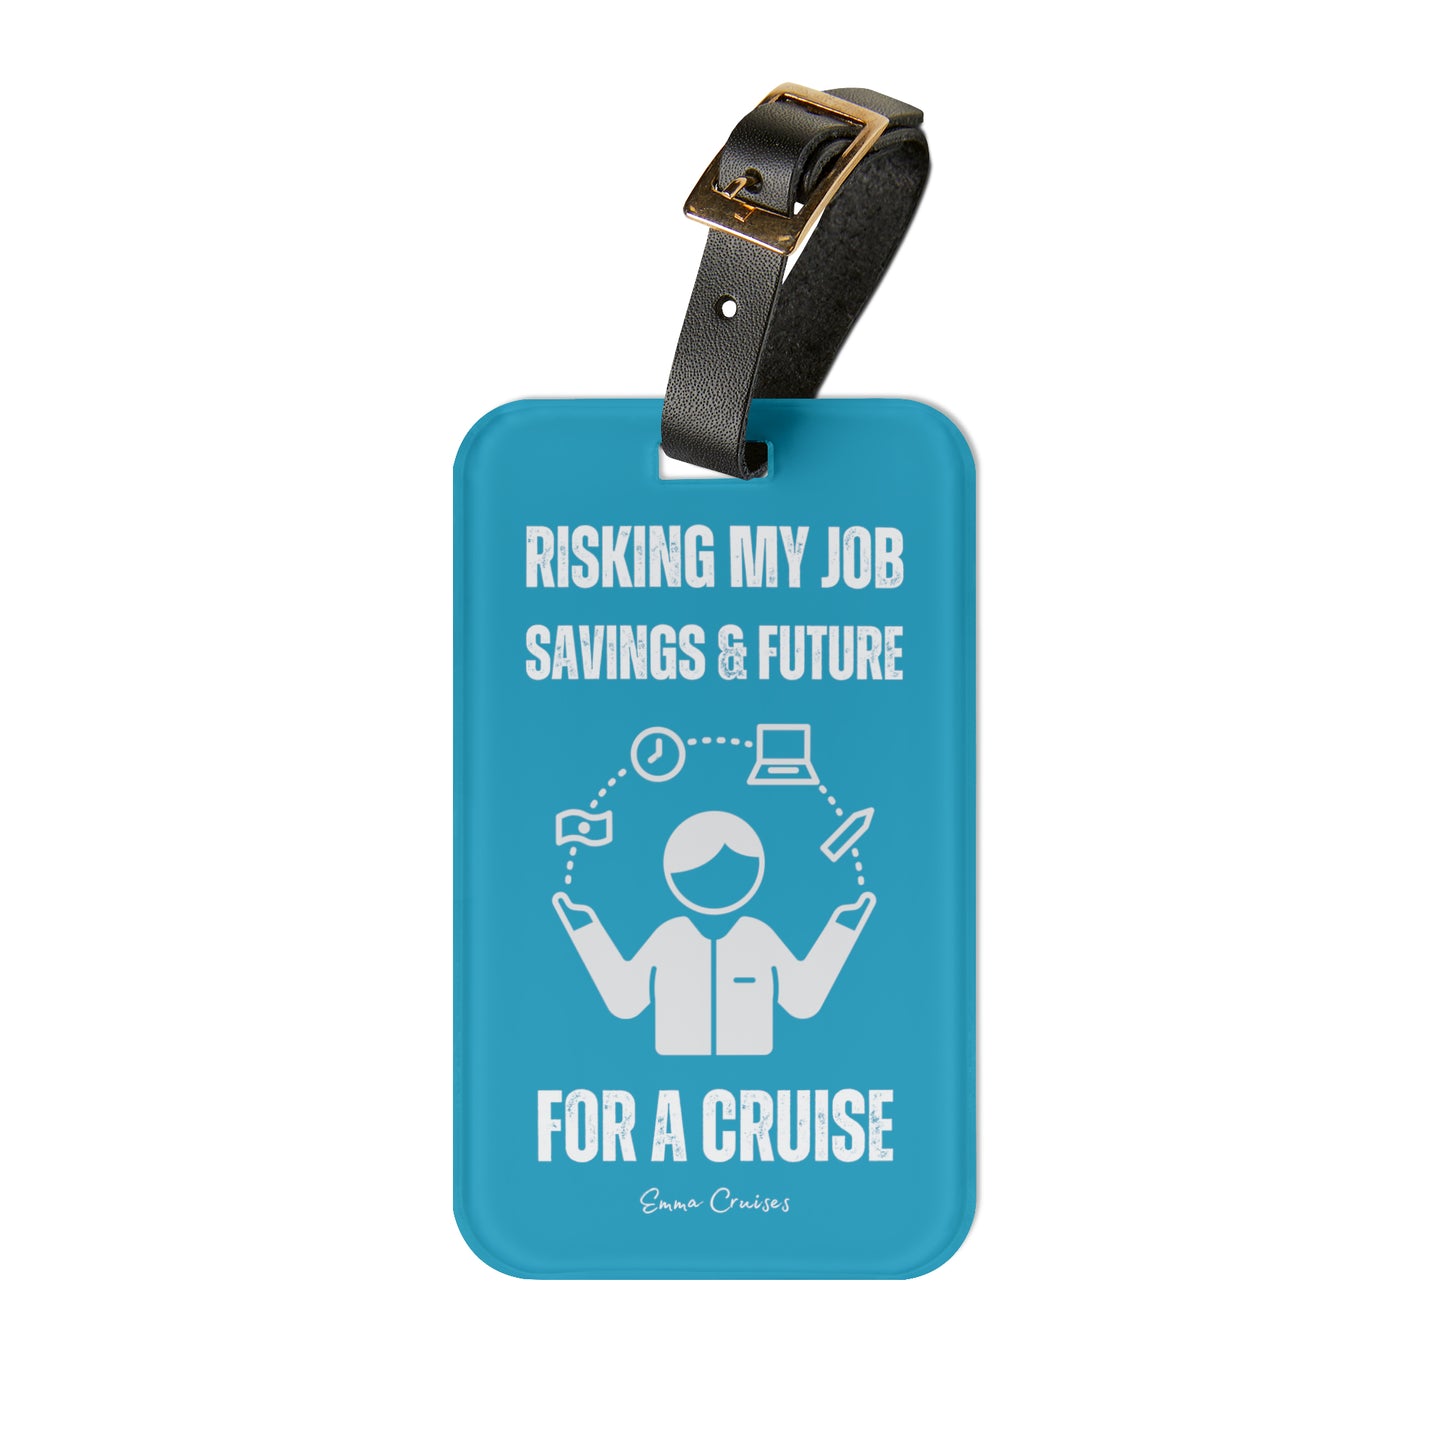 Risking Everything for a Cruise - Luggage Tag